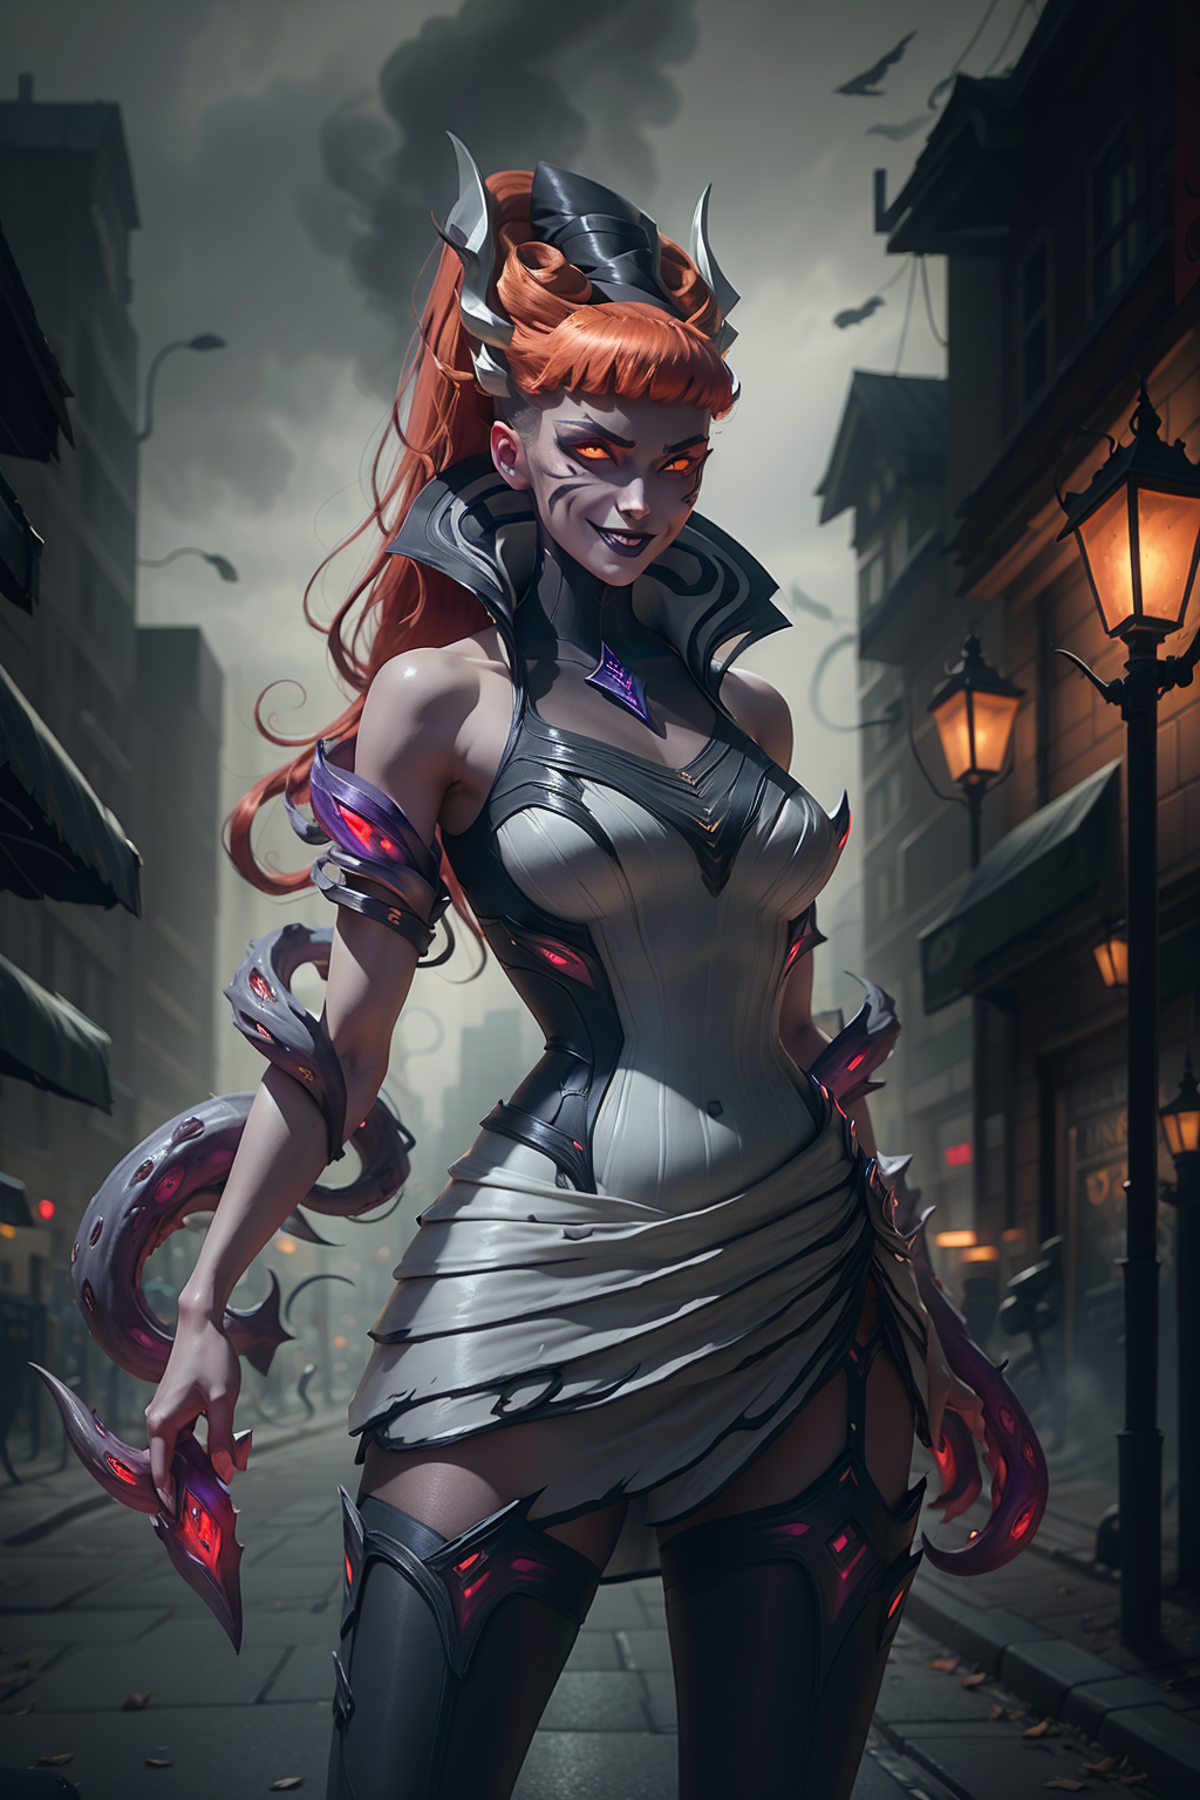 Crime City Nightmare Zyra - League of Legends - Character LORA image by Konan